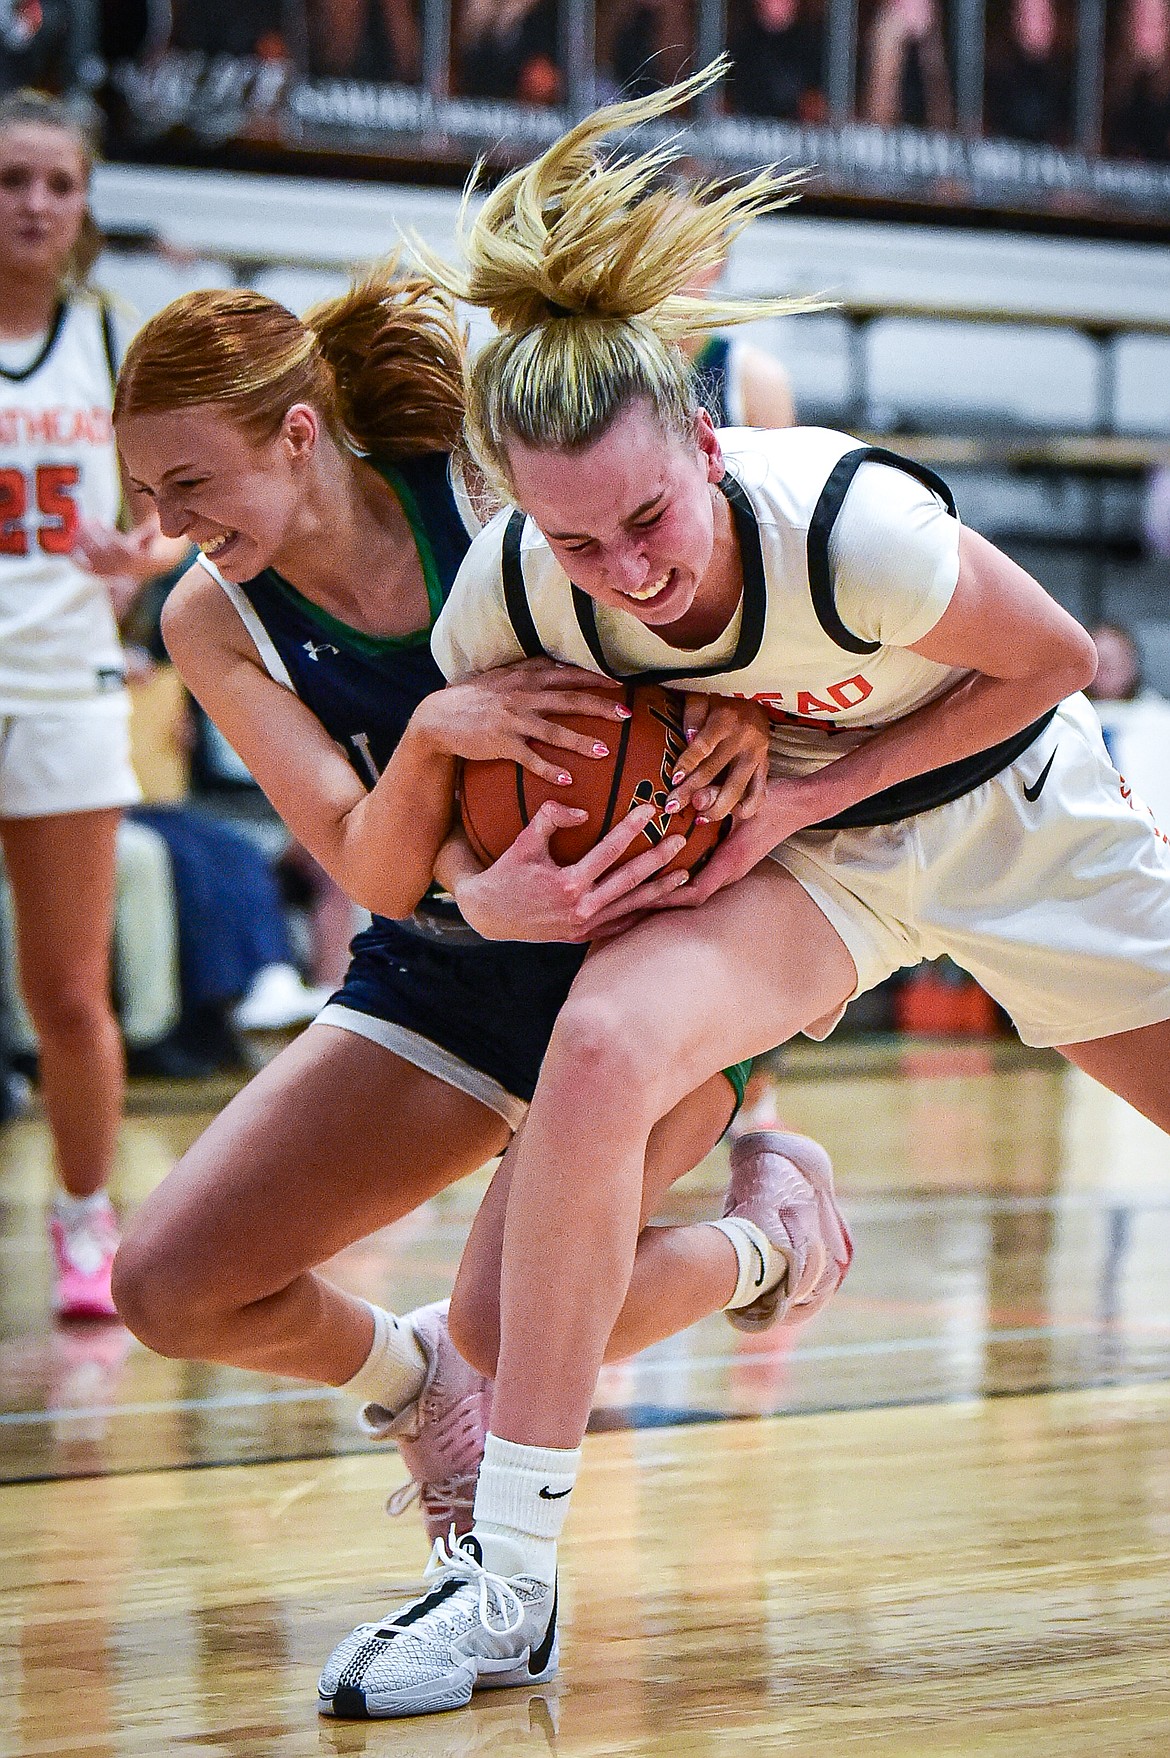 Flathead's Kennedy Moore (14) battles for possession with Glacier's Kenedee Moore (11) in the first half at Flathead High School on Friday, Jan. 19. (Casey Kreider/Daily Inter Lake)